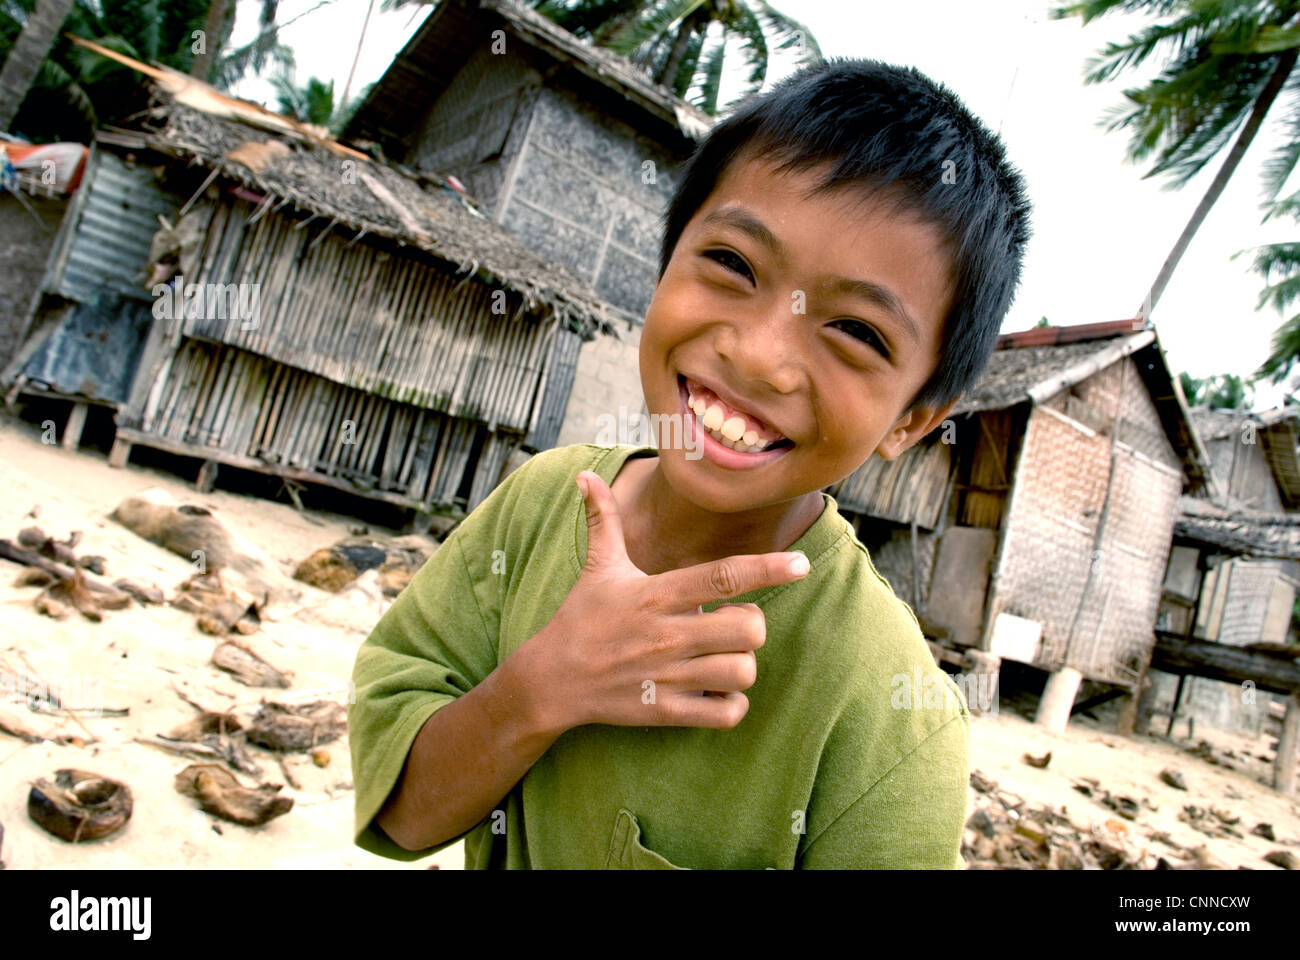 philippines, siquijor island, boy in front of fisher's house Stock Photo